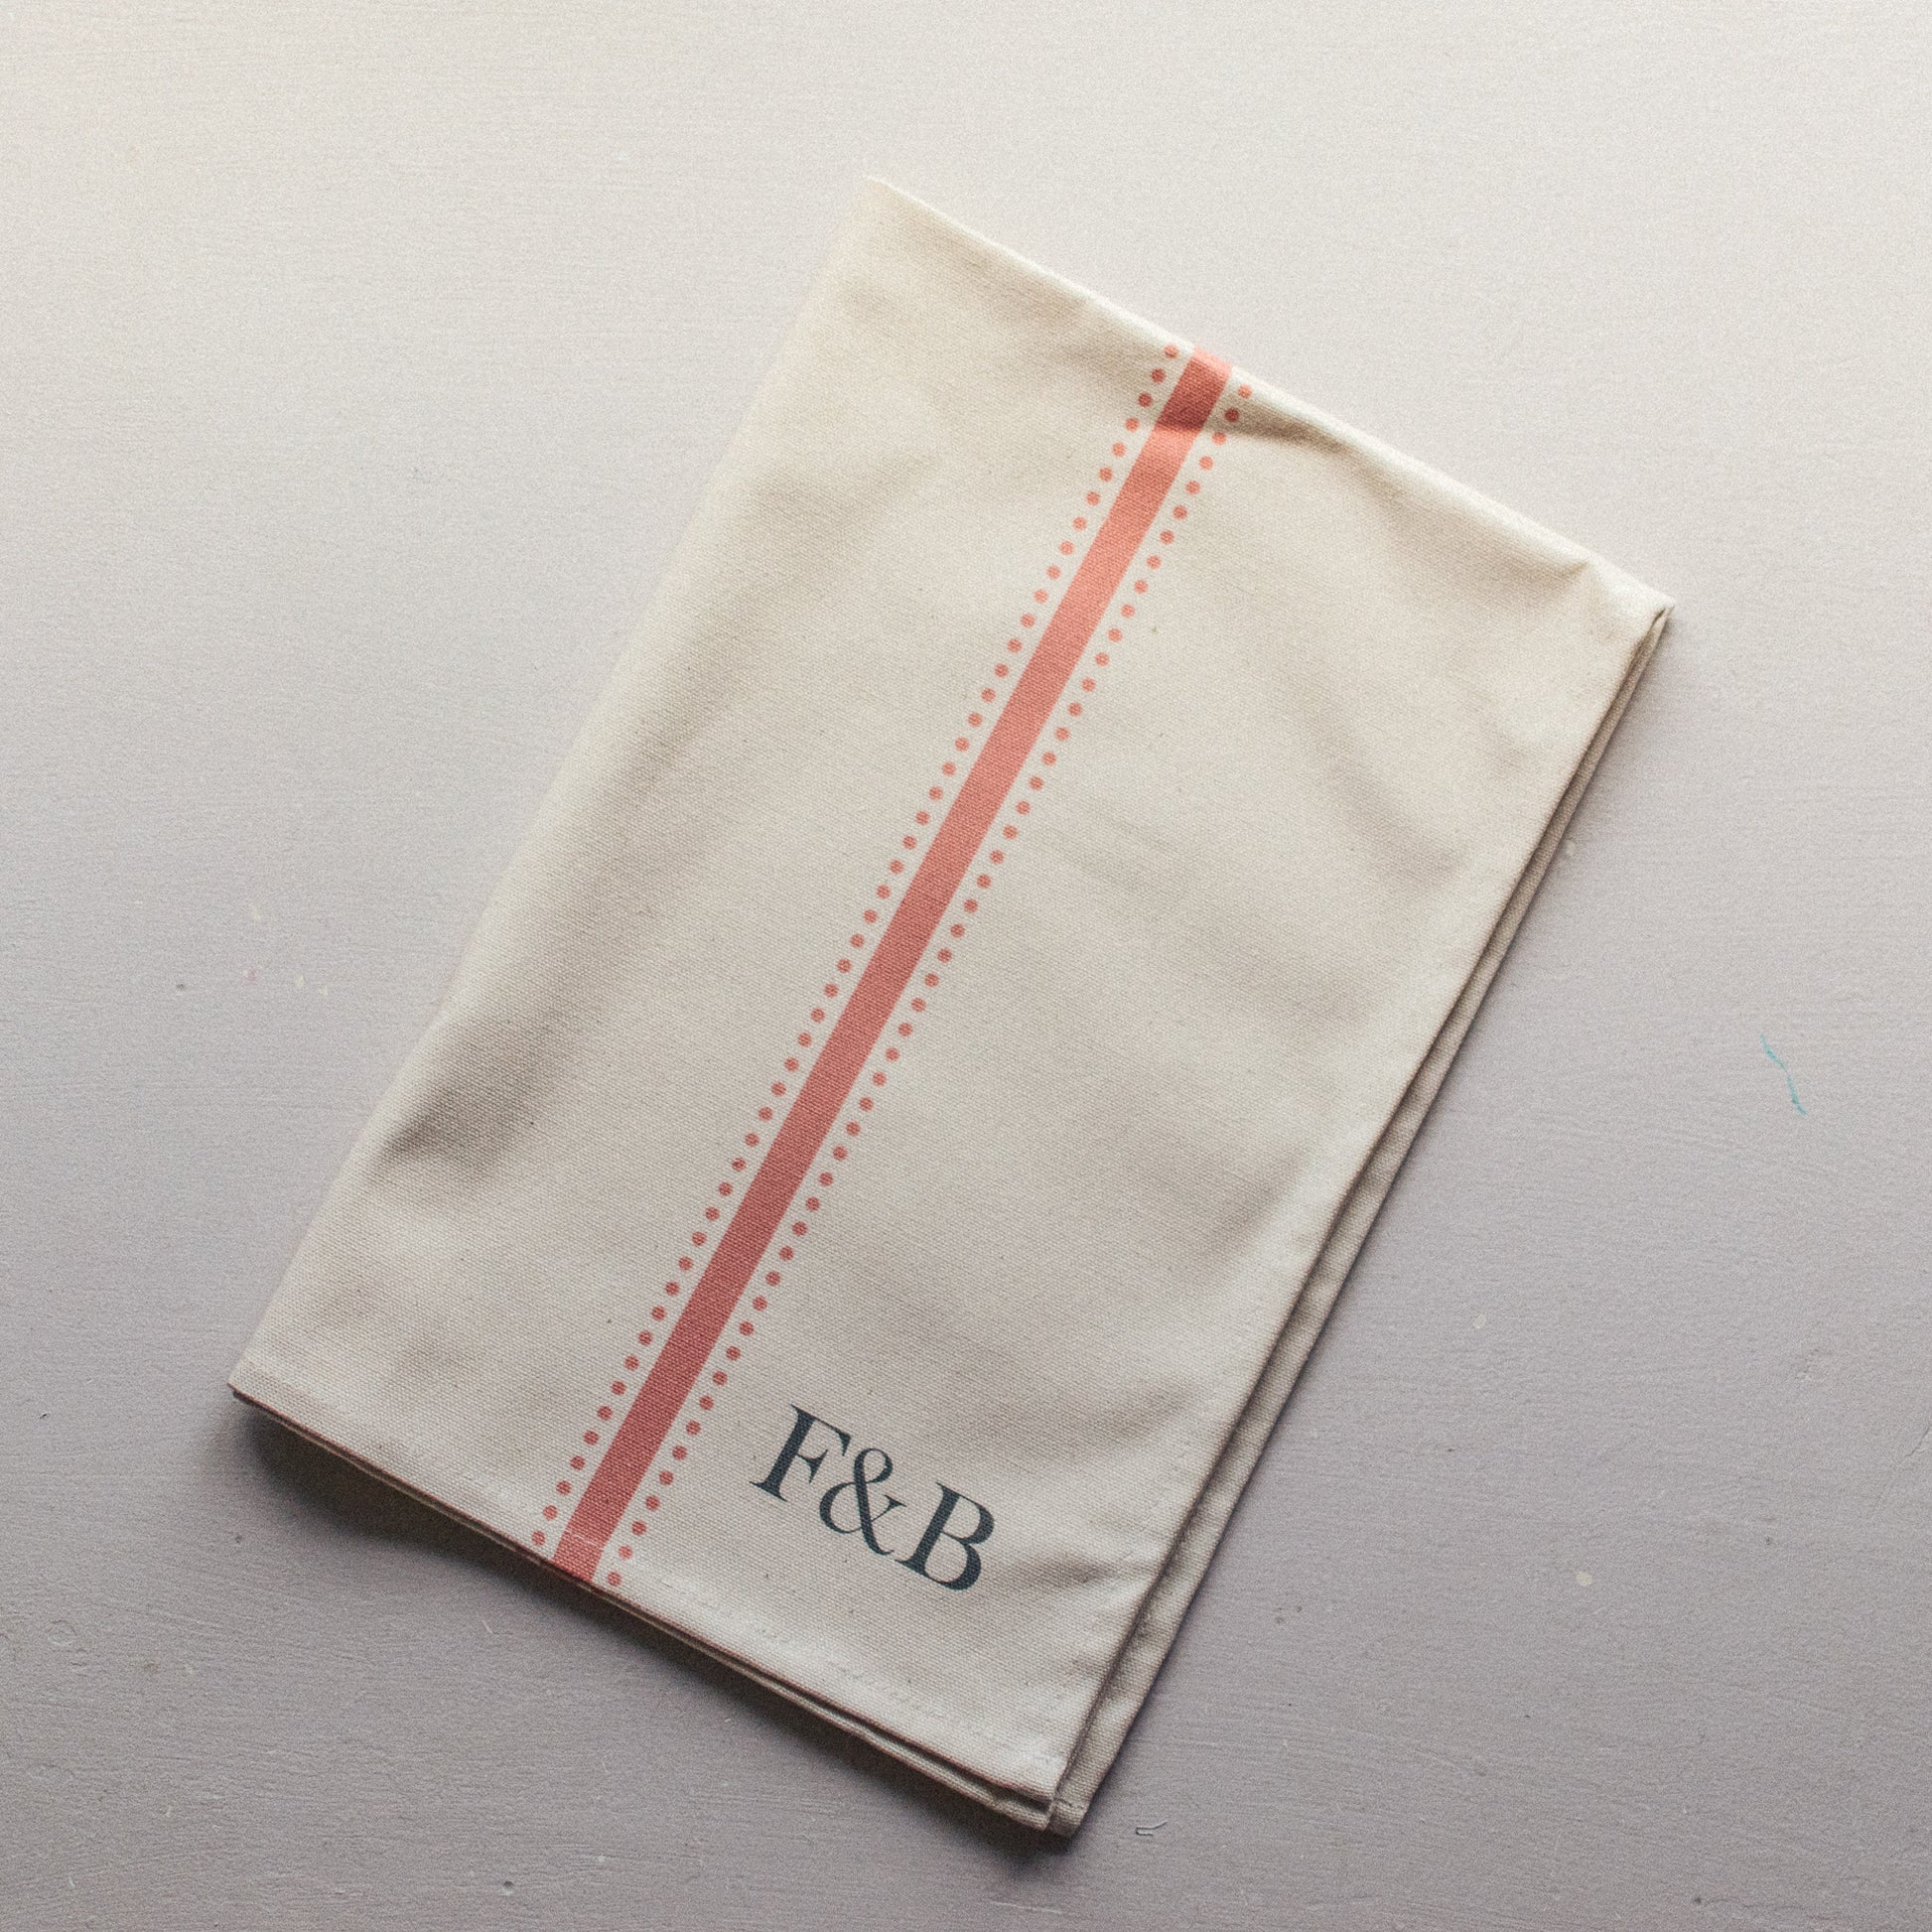 F&B Vintage Inspired Tea Towels 100% cotton pink stripe and dots by F&B